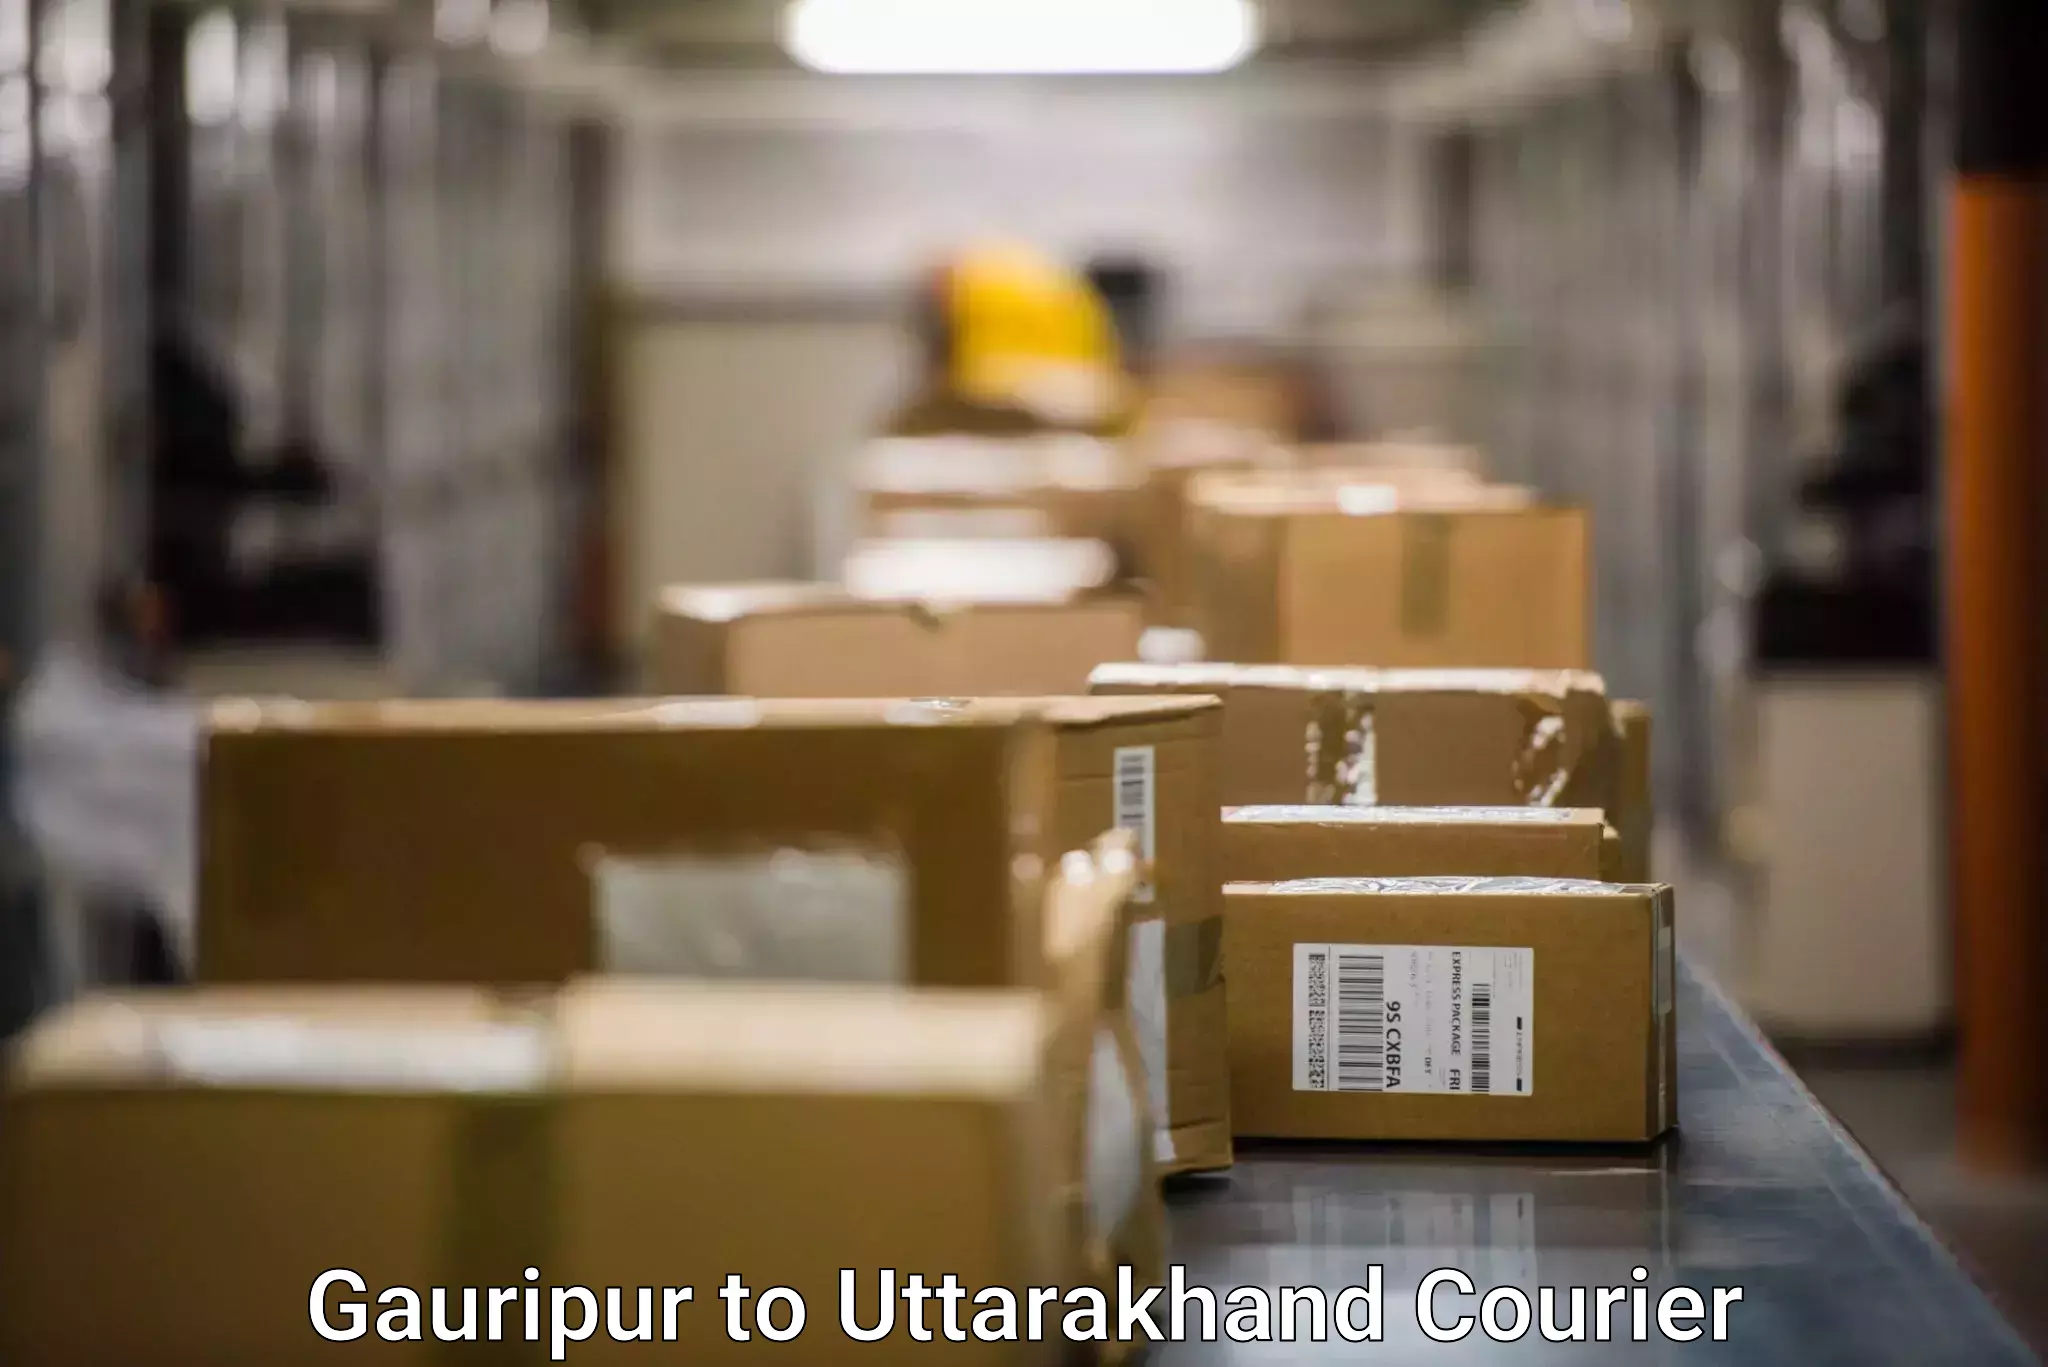 Package delivery network Gauripur to Uttarakhand